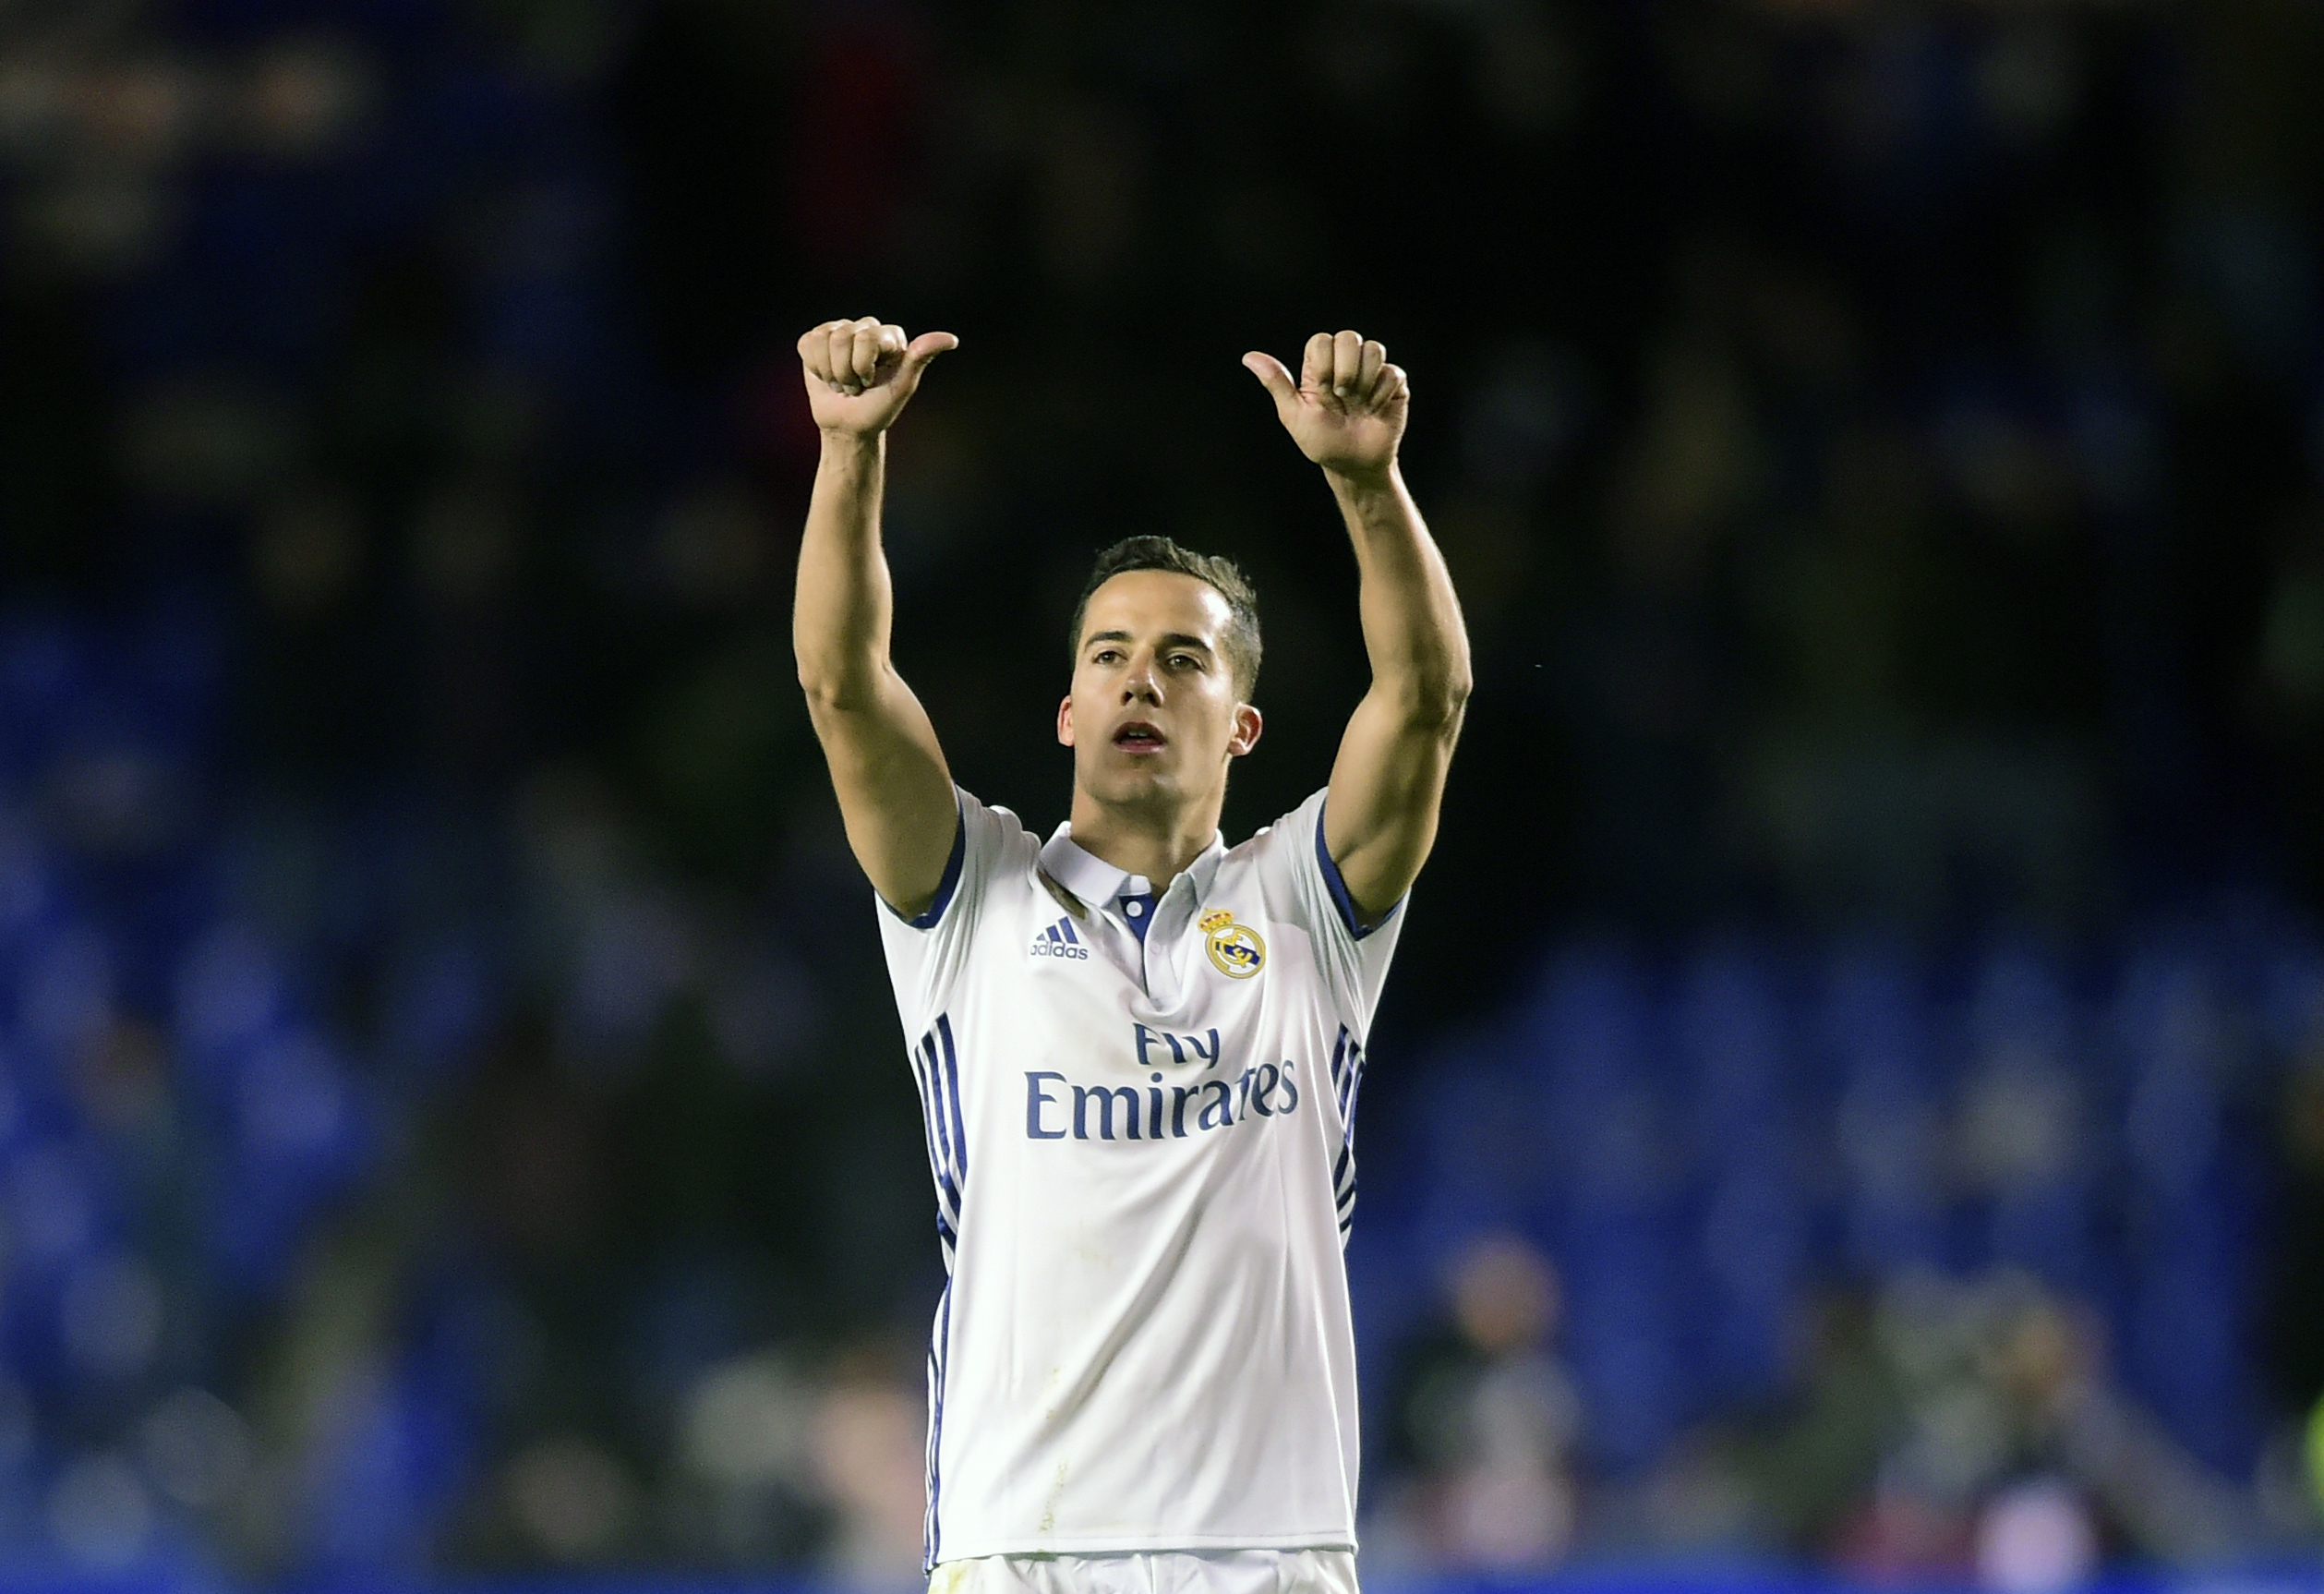 Real Madrid's midfielder Lucas Vazquez celebrates at the end of the  Spanish league football match RC Deportivo vs Real Madrid CF at the Municipal de Riazor stadium in La Coruna on April 26, 2017. / AFP PHOTO / MIGUEL RIOPA        (Photo credit should read MIGUEL RIOPA/AFP/Getty Images)